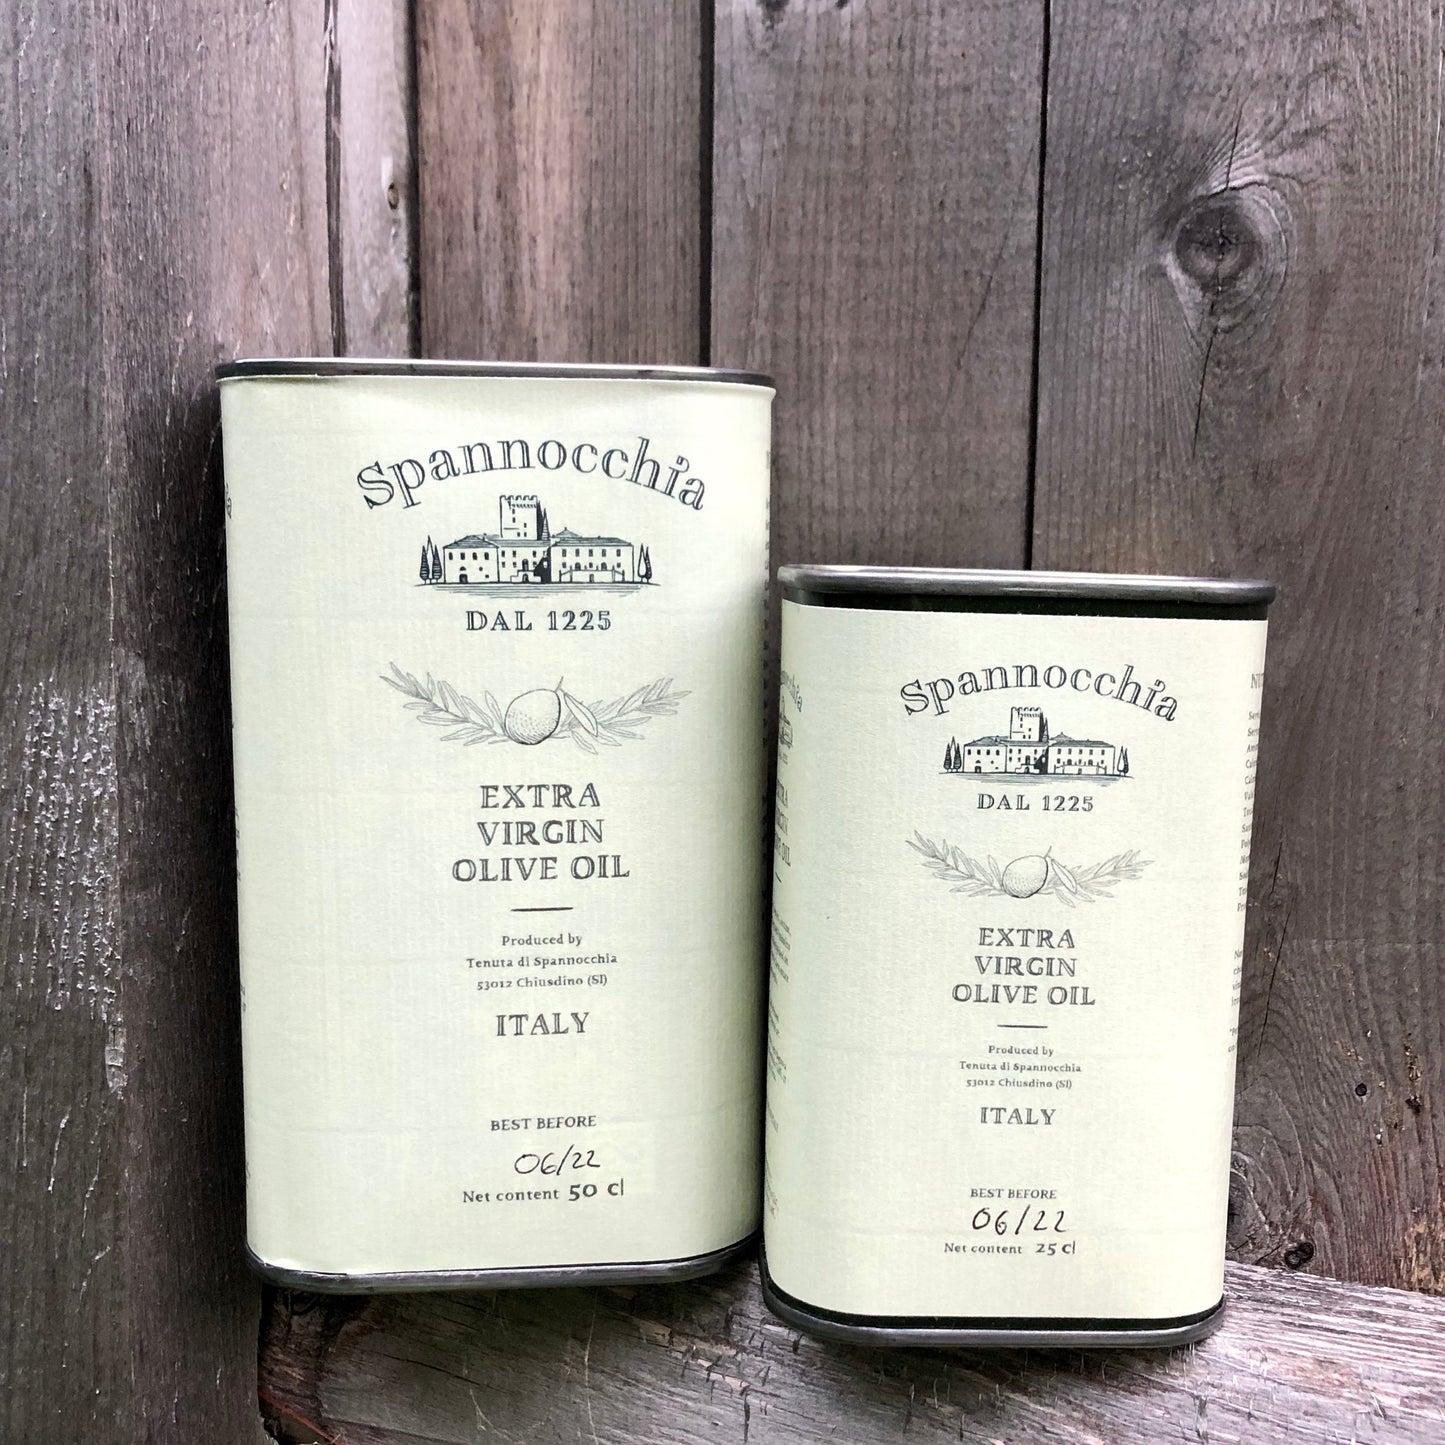 Two cans of Spannocchia olive oil against a weathered wooden fence.